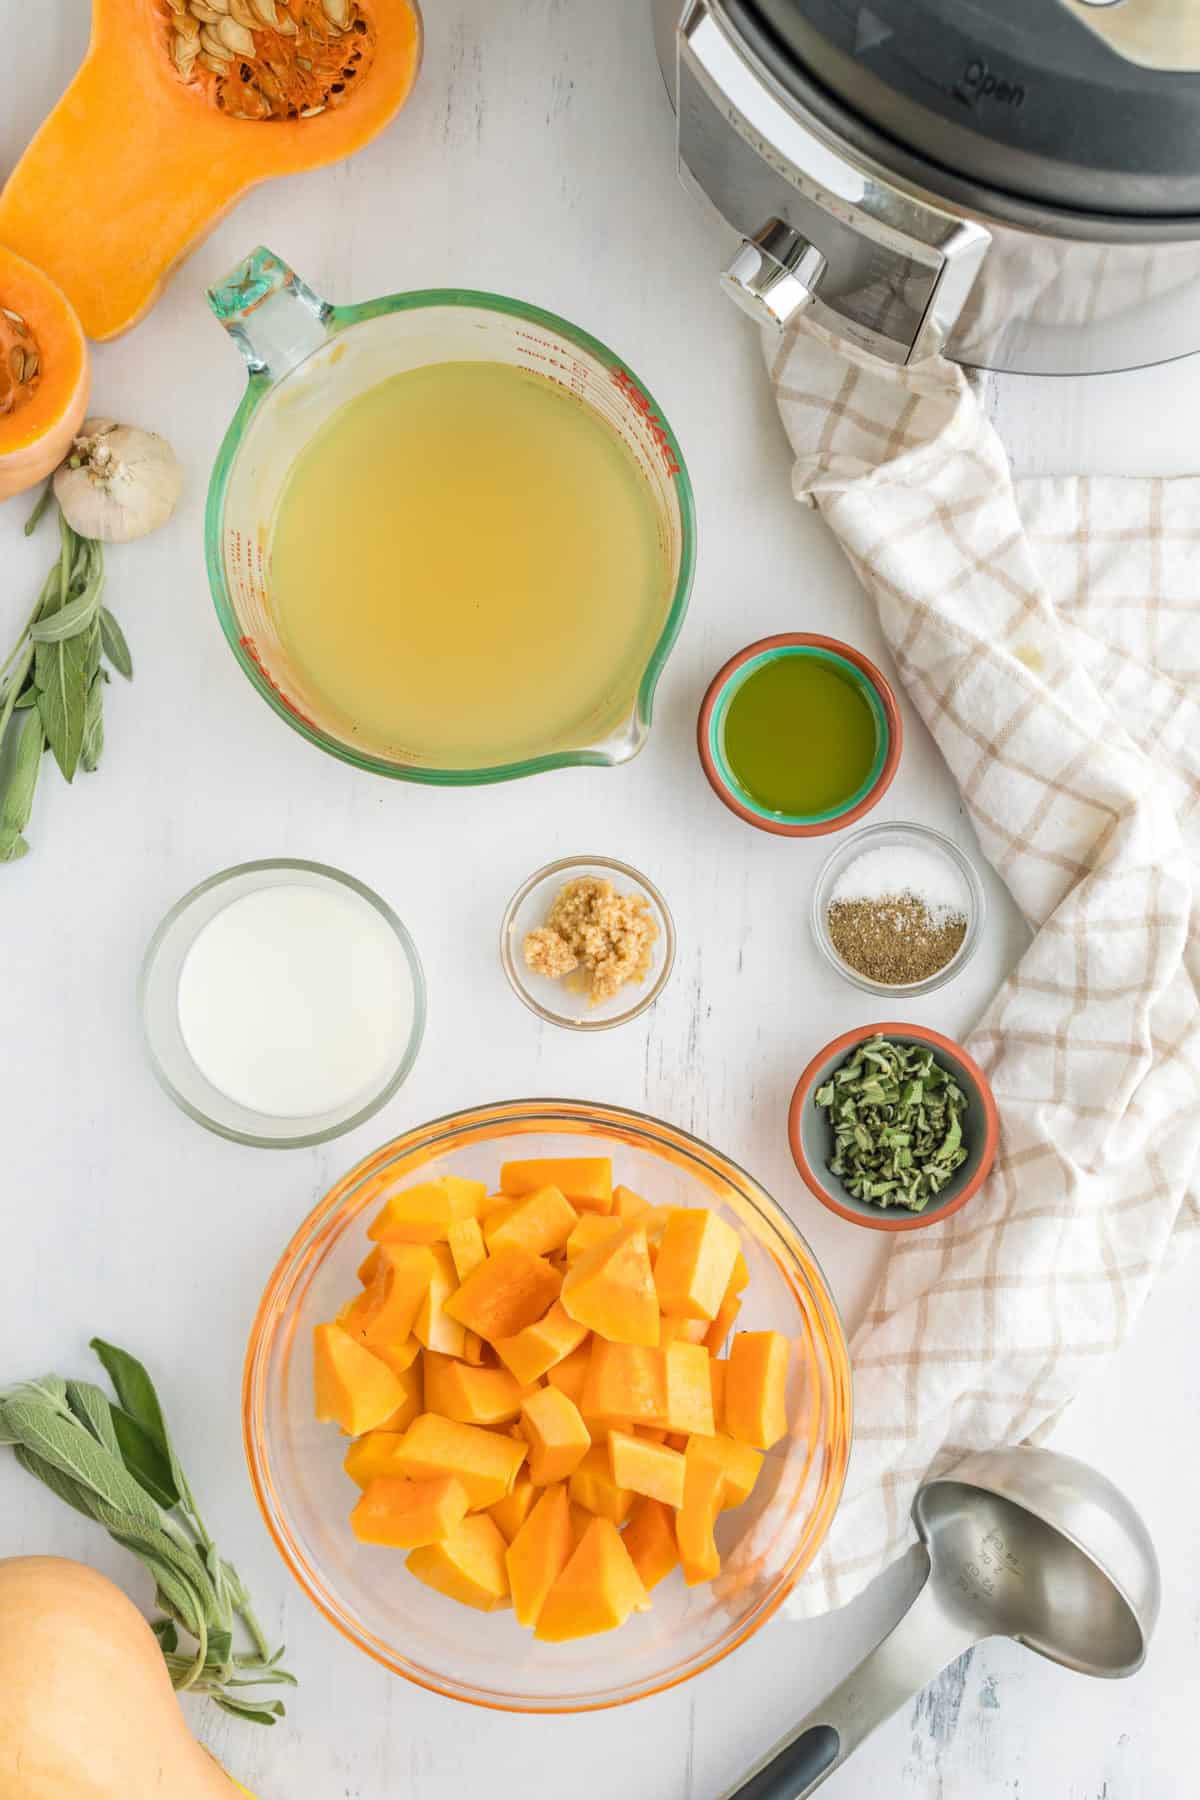 Ingredients Needed For Instant Pot Cream of Butternut Squash Soup